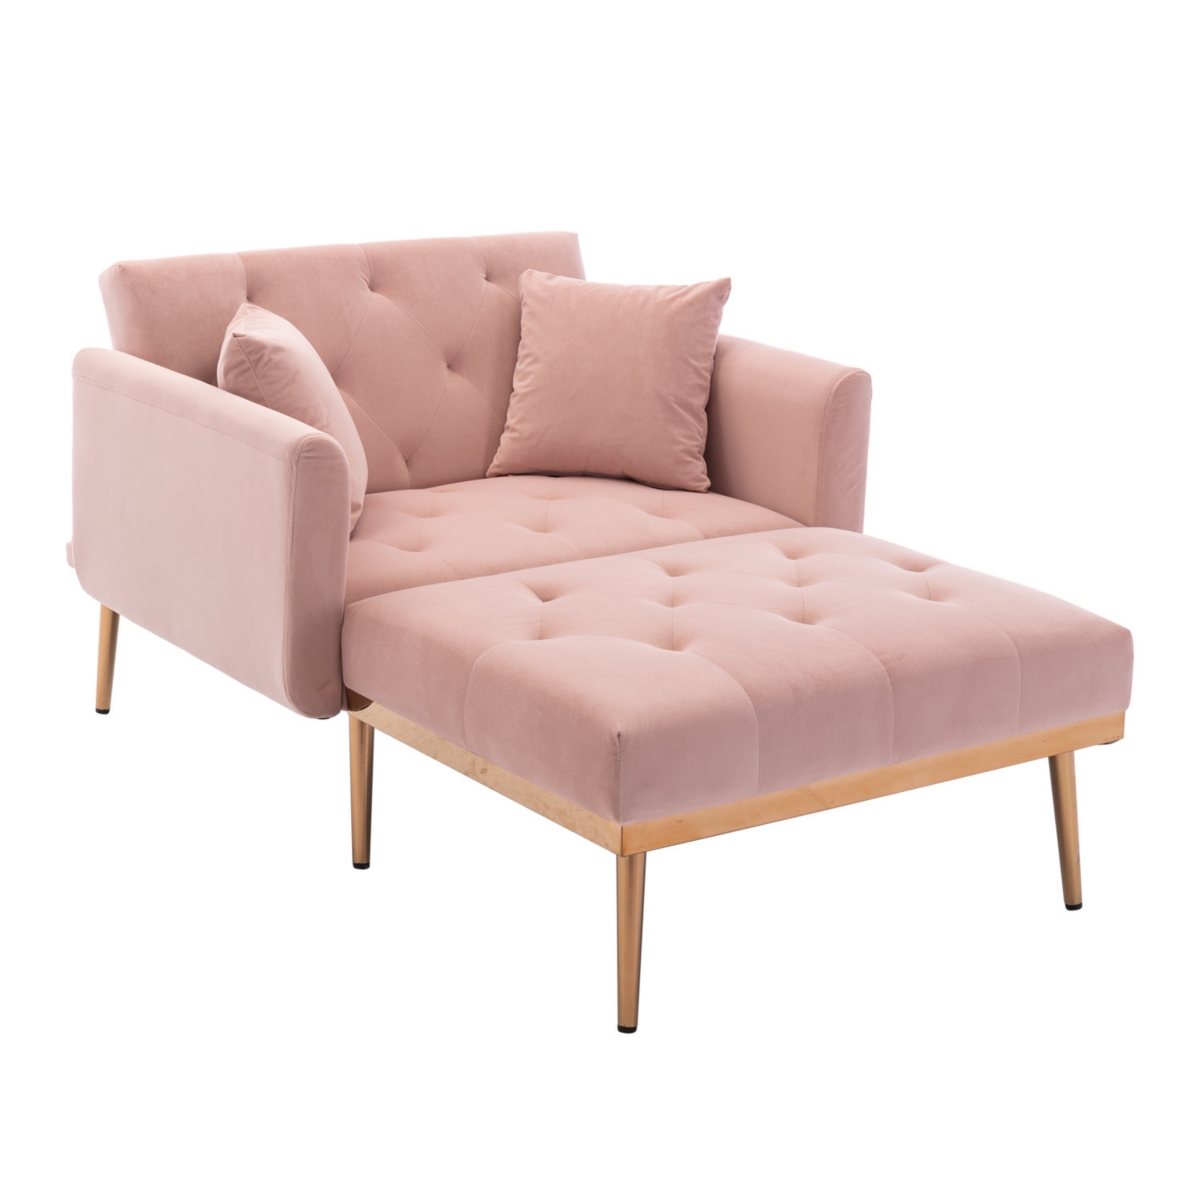 Simplie Fun Chaise Lounge Chair /accent Chair In Pink